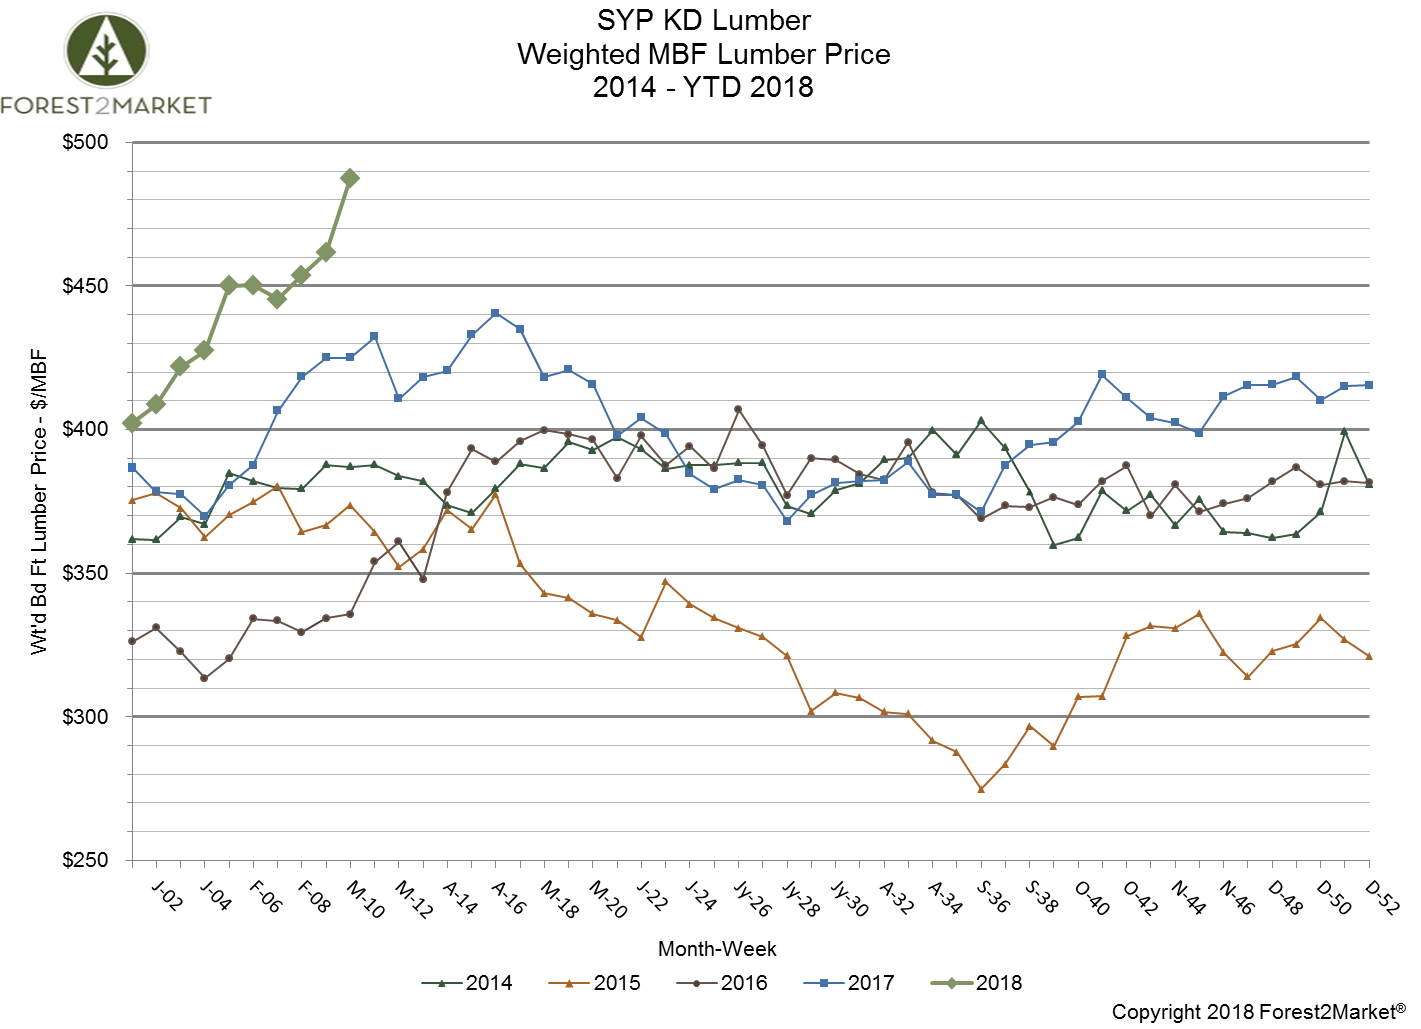 Southern Yellow Pine Lumber Prices Hit New High in March